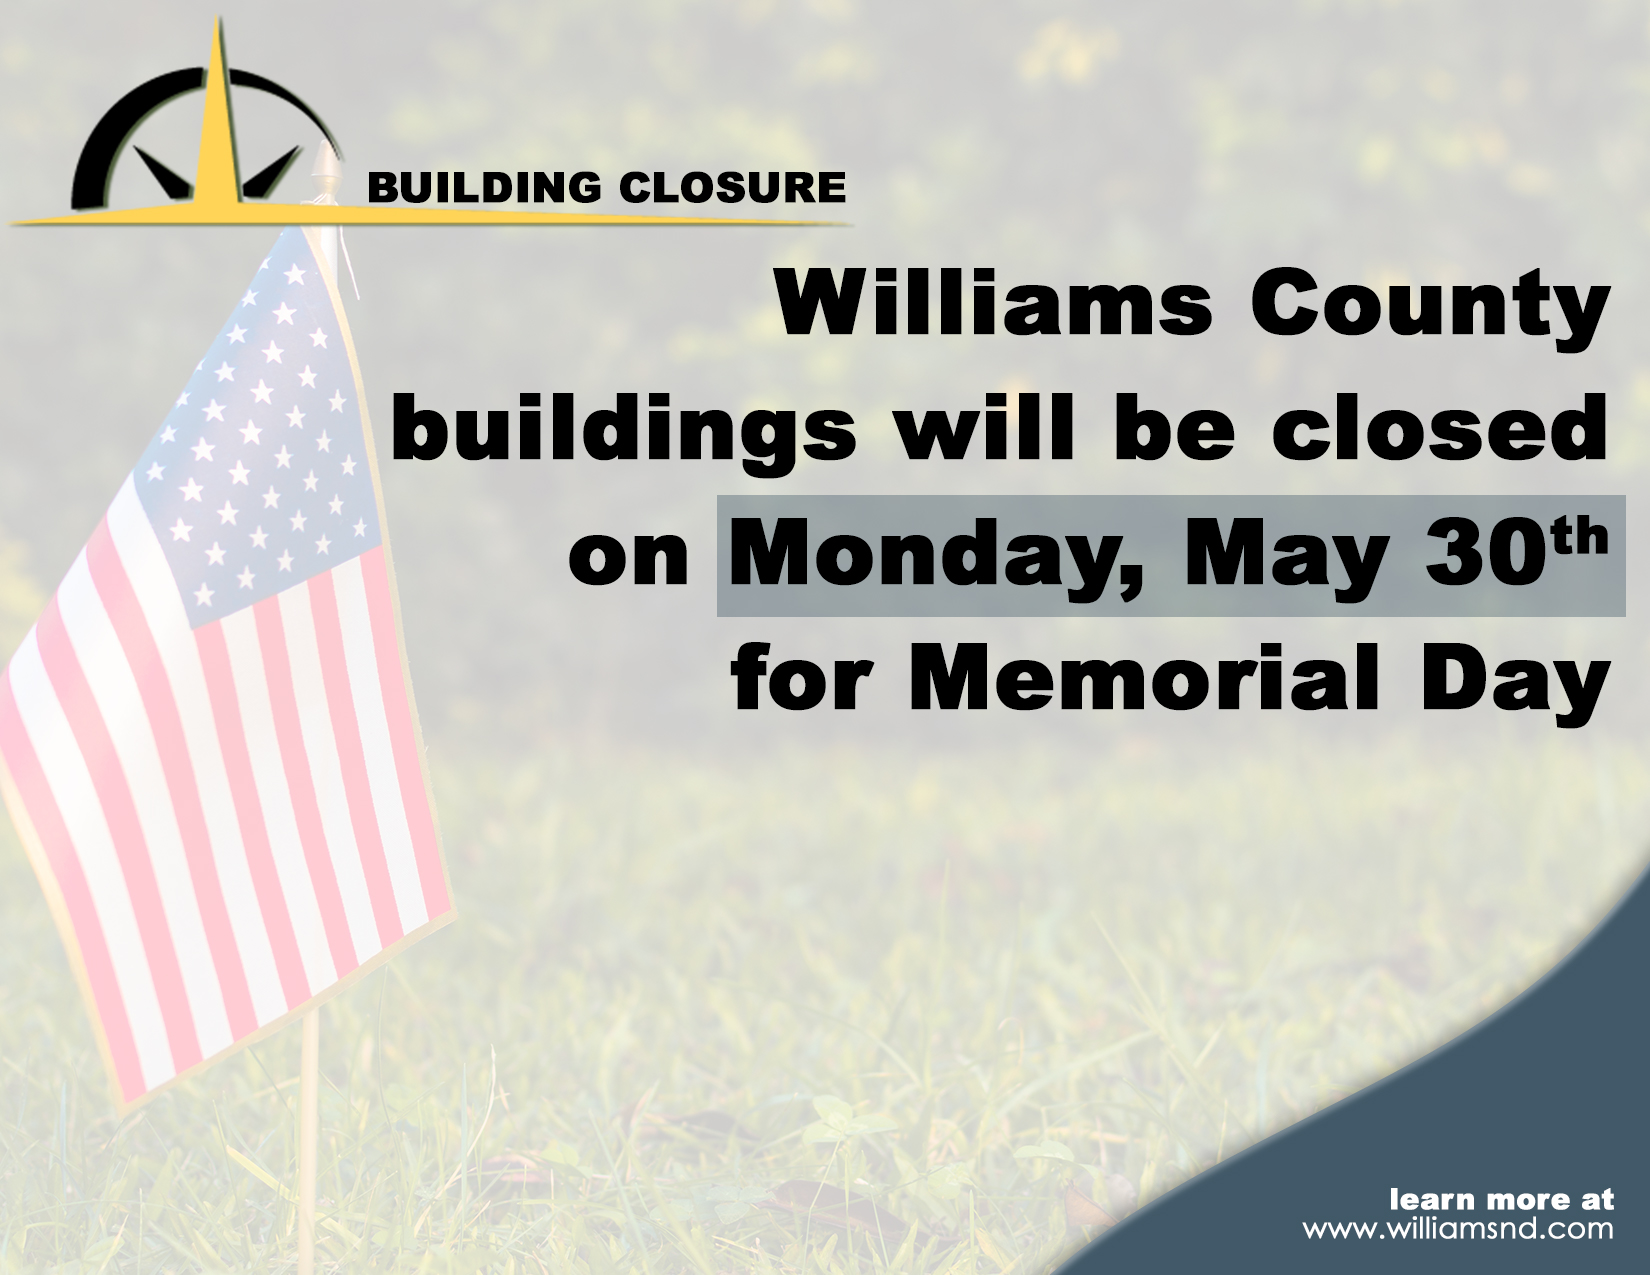 Image of american flag with text Williams County buildings will be closed on Monday, May 30th for Memorial Day